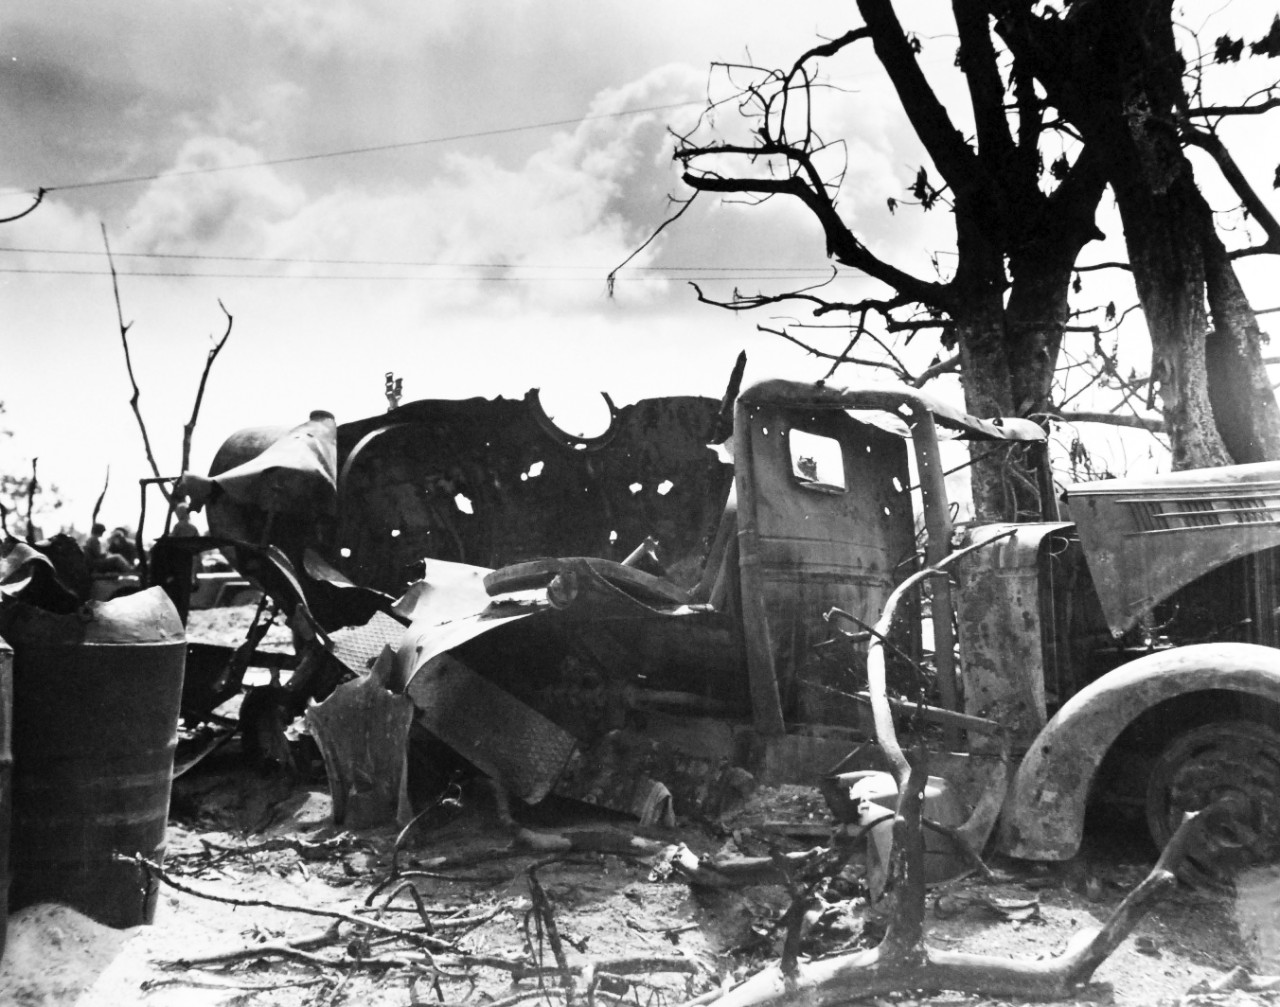 80-G-307846:  Invasion of Saipan, June-July 1944.  Japanese equipment and installations some of which were badly wrecked found on Saipan Island after invasion operations.  Photograph received March 20, 1945.      Official U.S. Navy Photograph, now in the collections of the U.S. Navy.  (2017/04/11).  